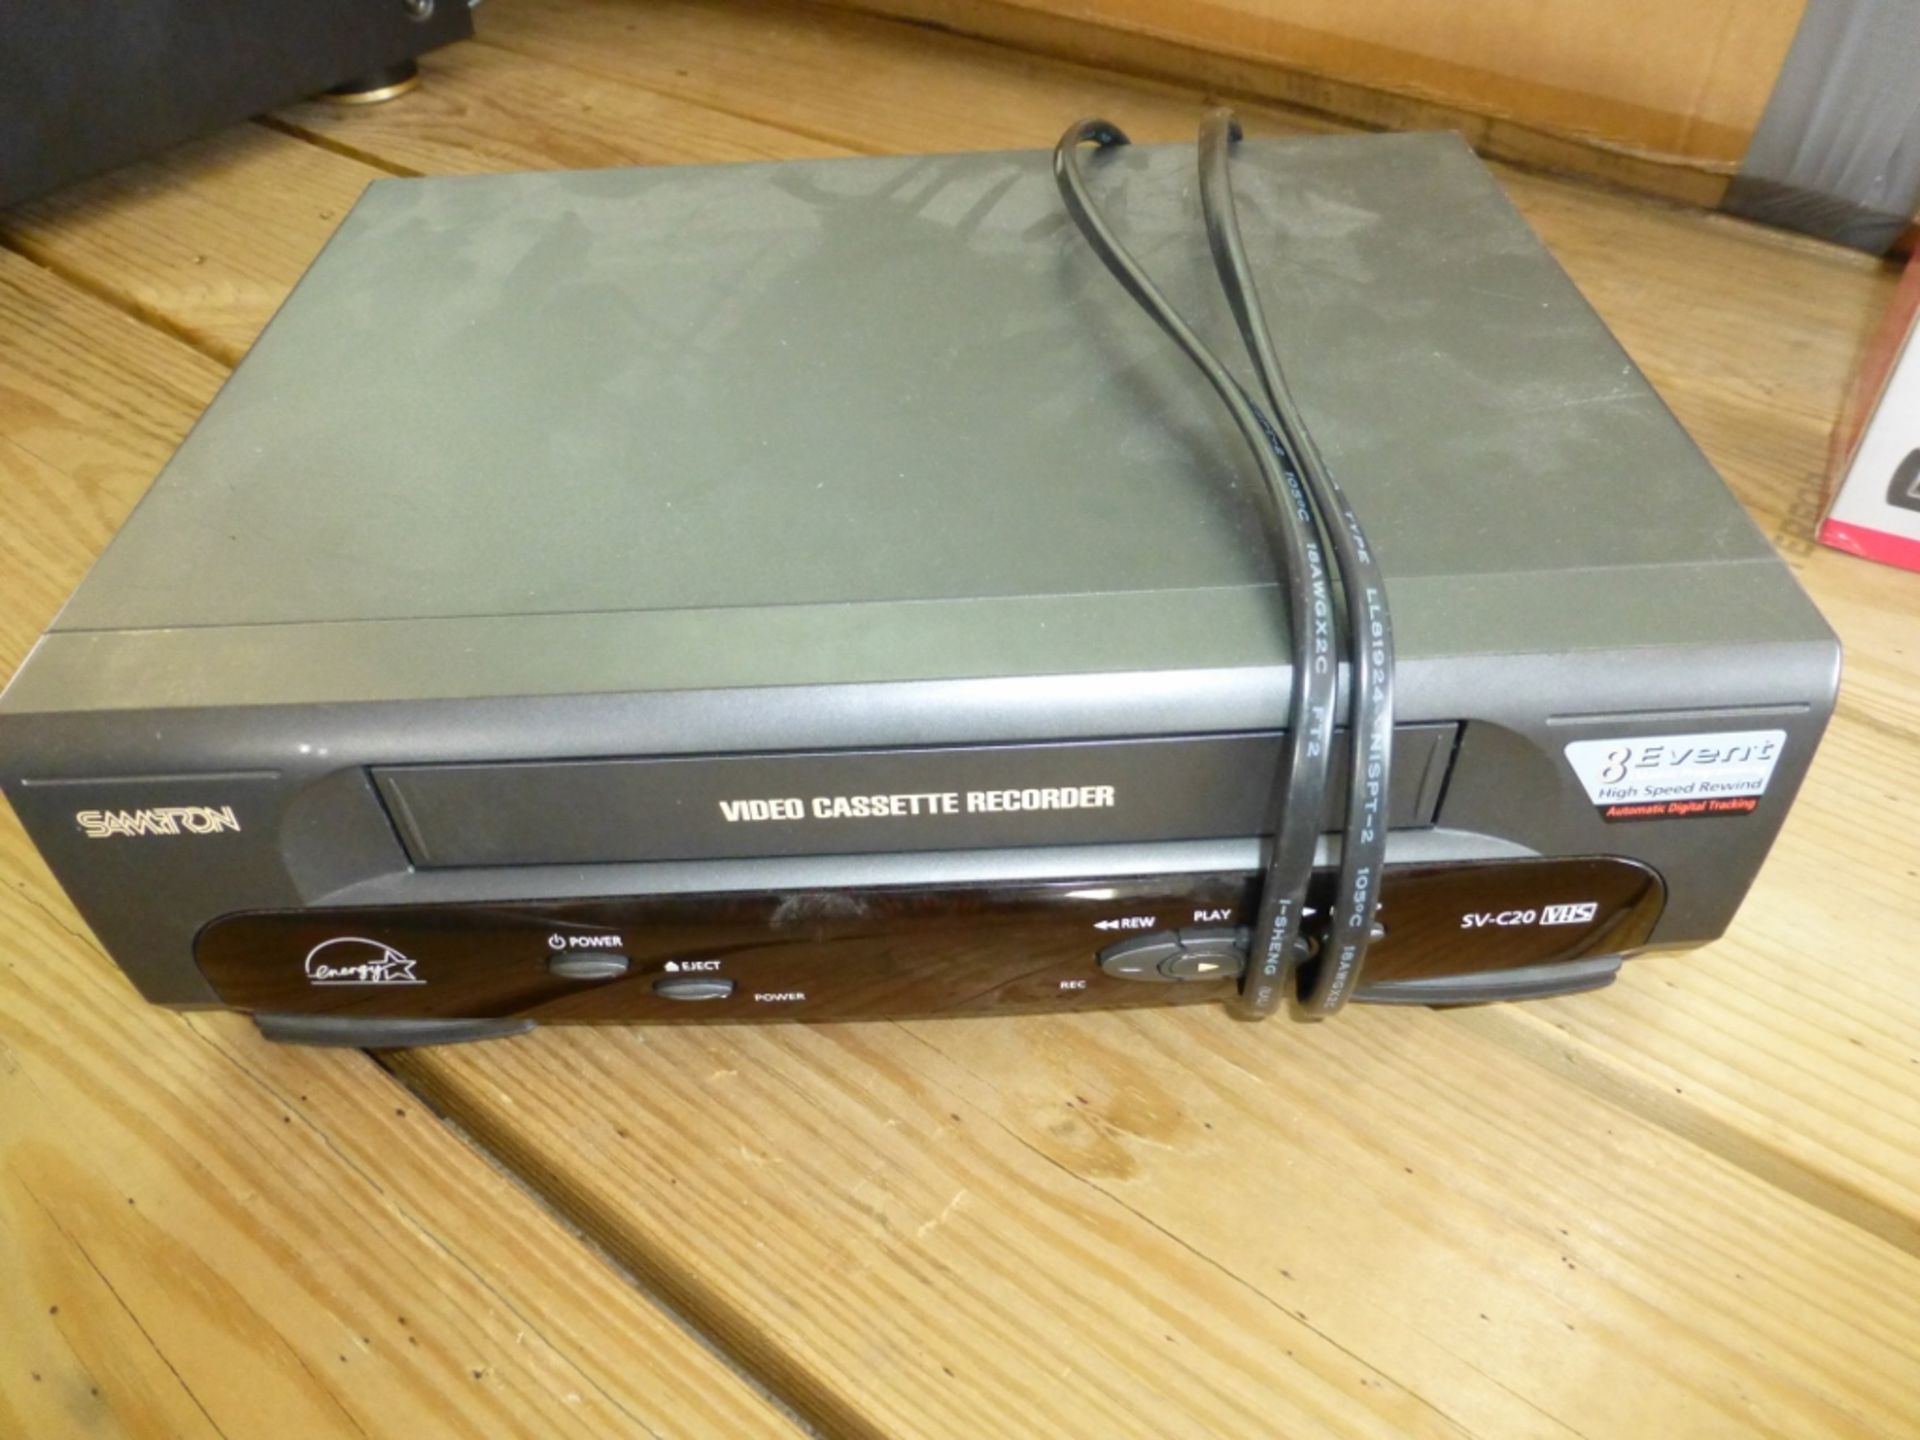 Samtron VCR with Memorex DVD player and digital converter box